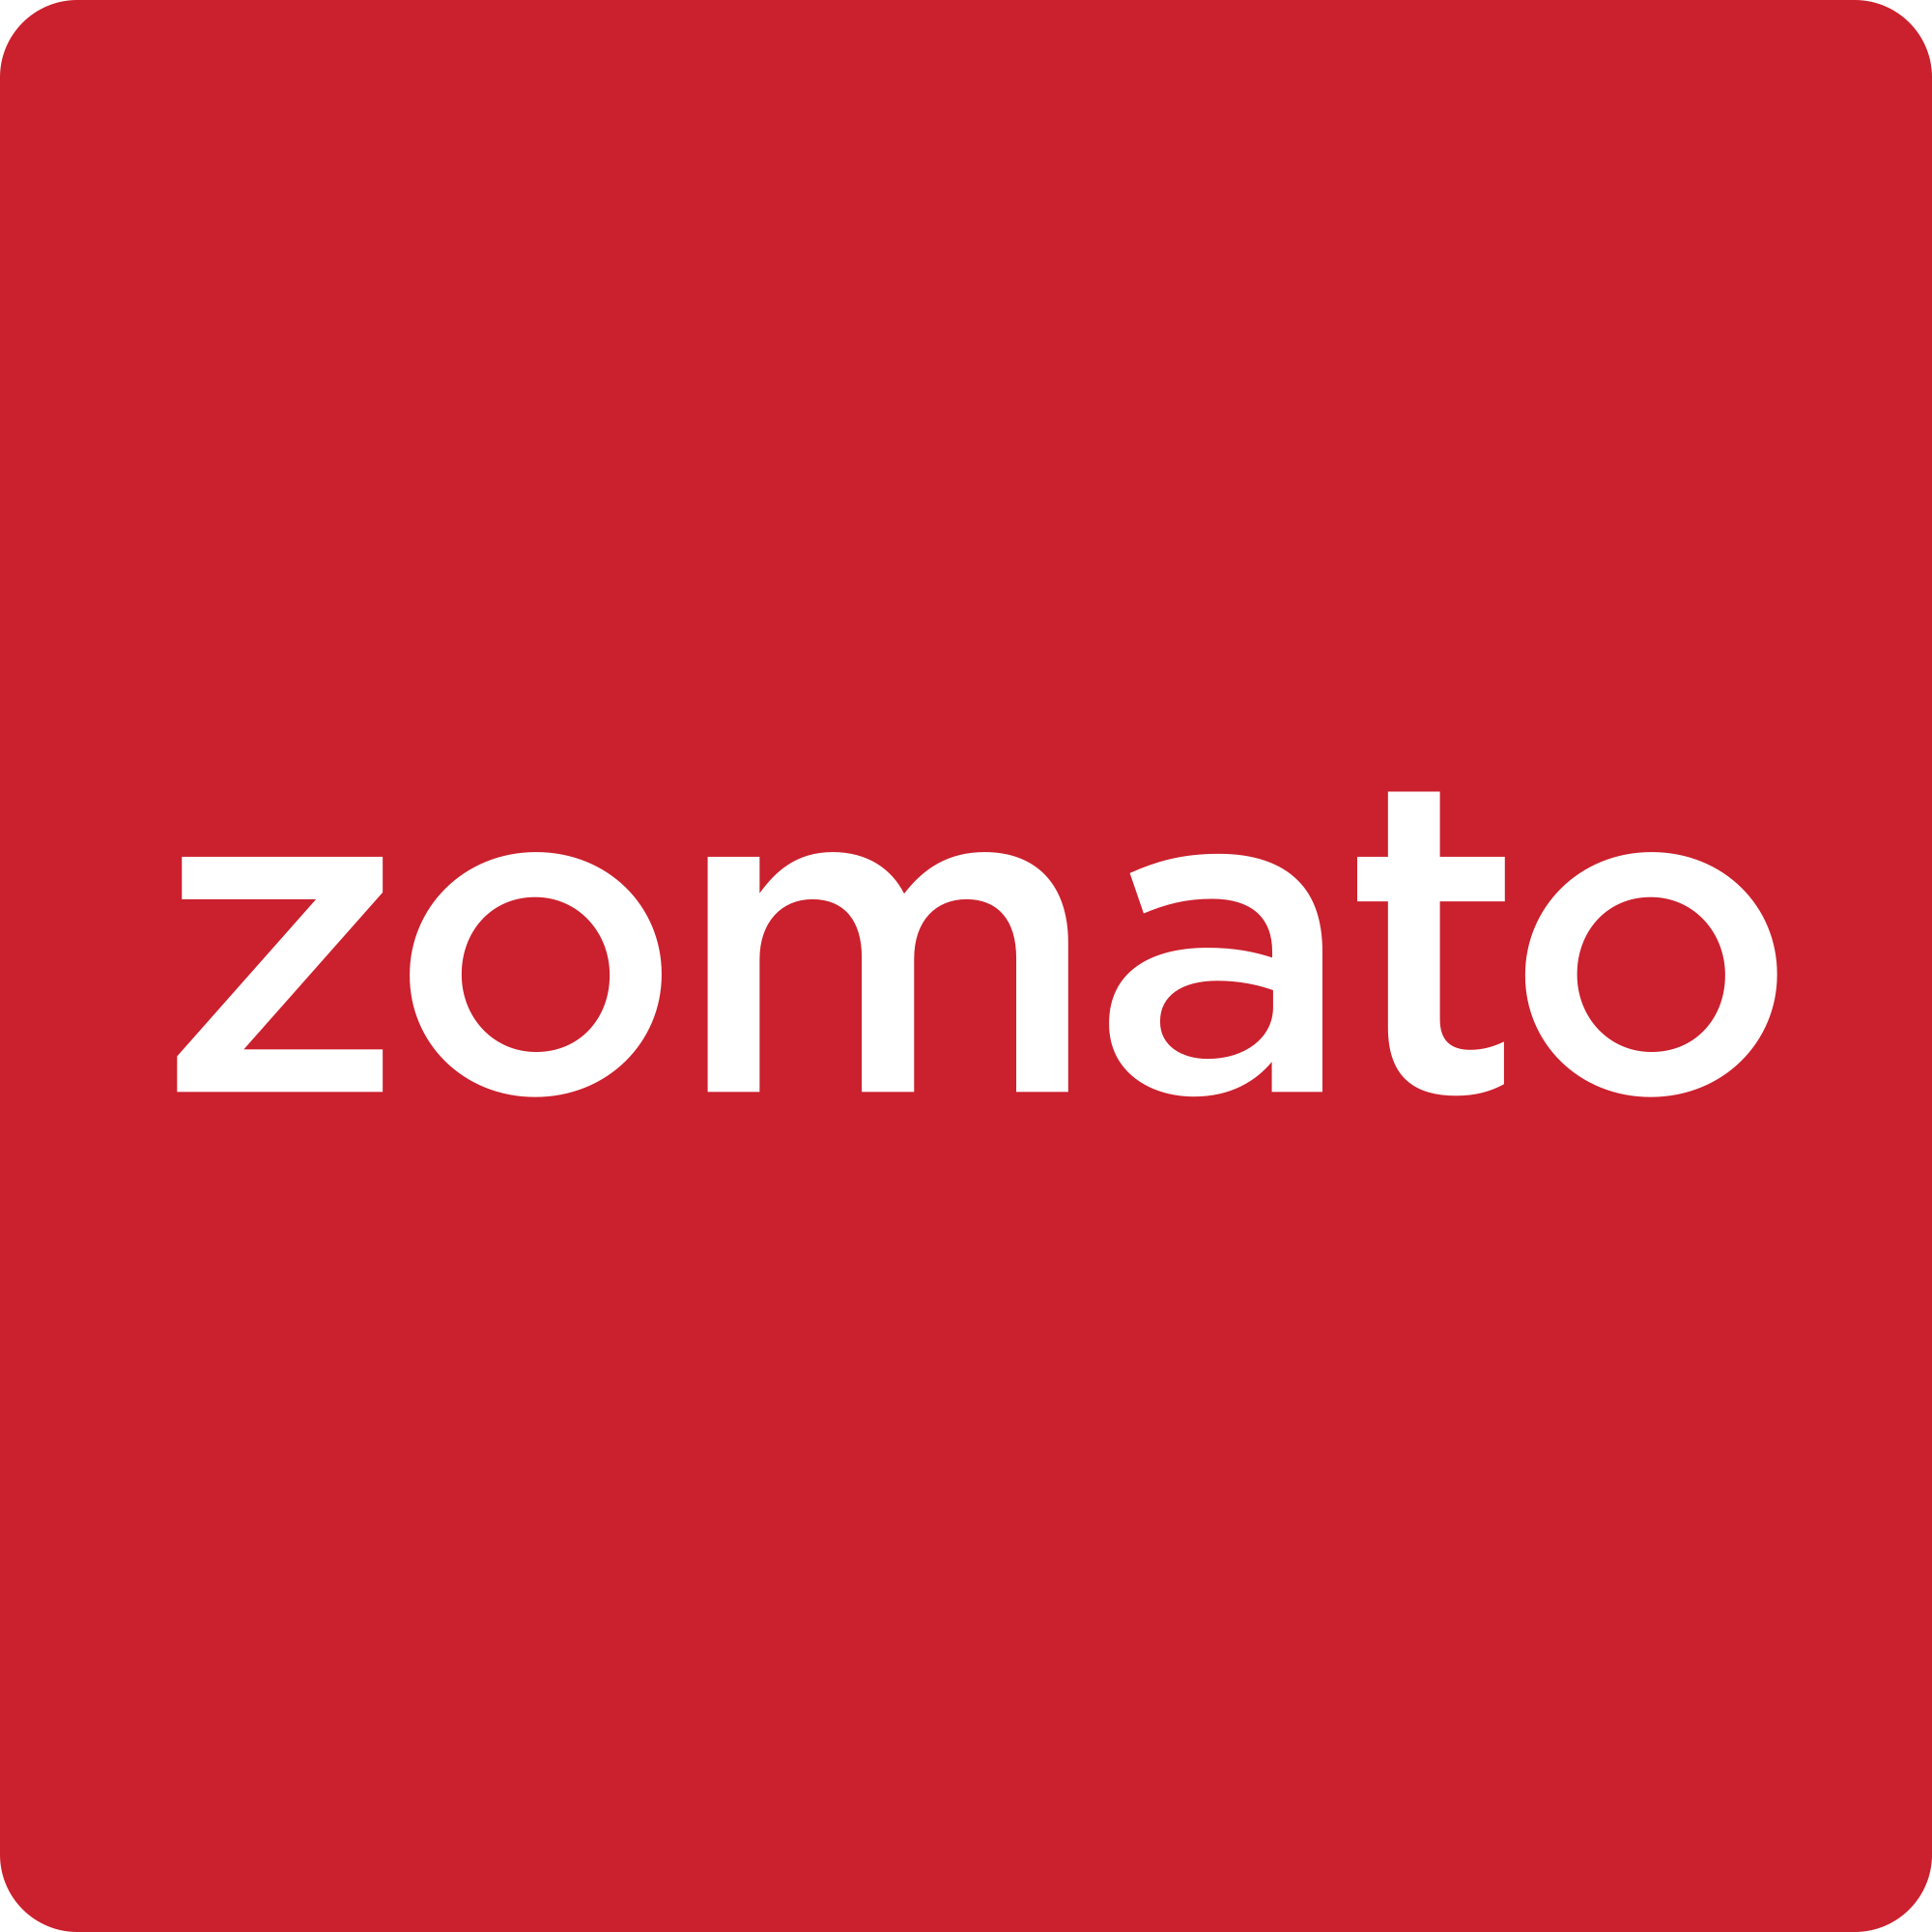 Zomato raises about Rs 405 Crores in latest funding from Investors